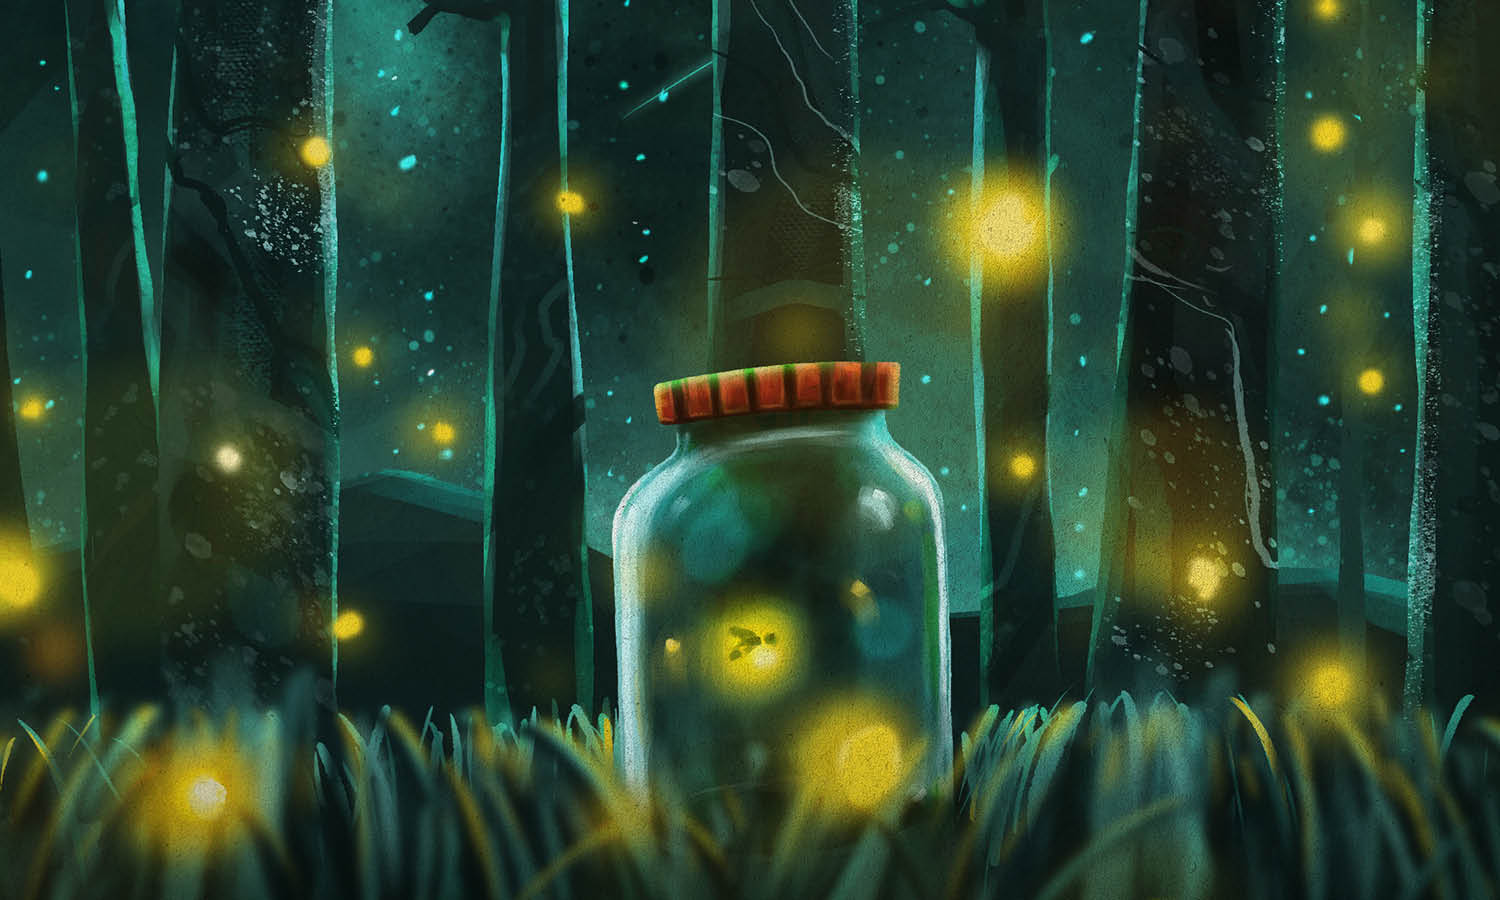 30 Best Firefly Illustration Ideas You Should Check